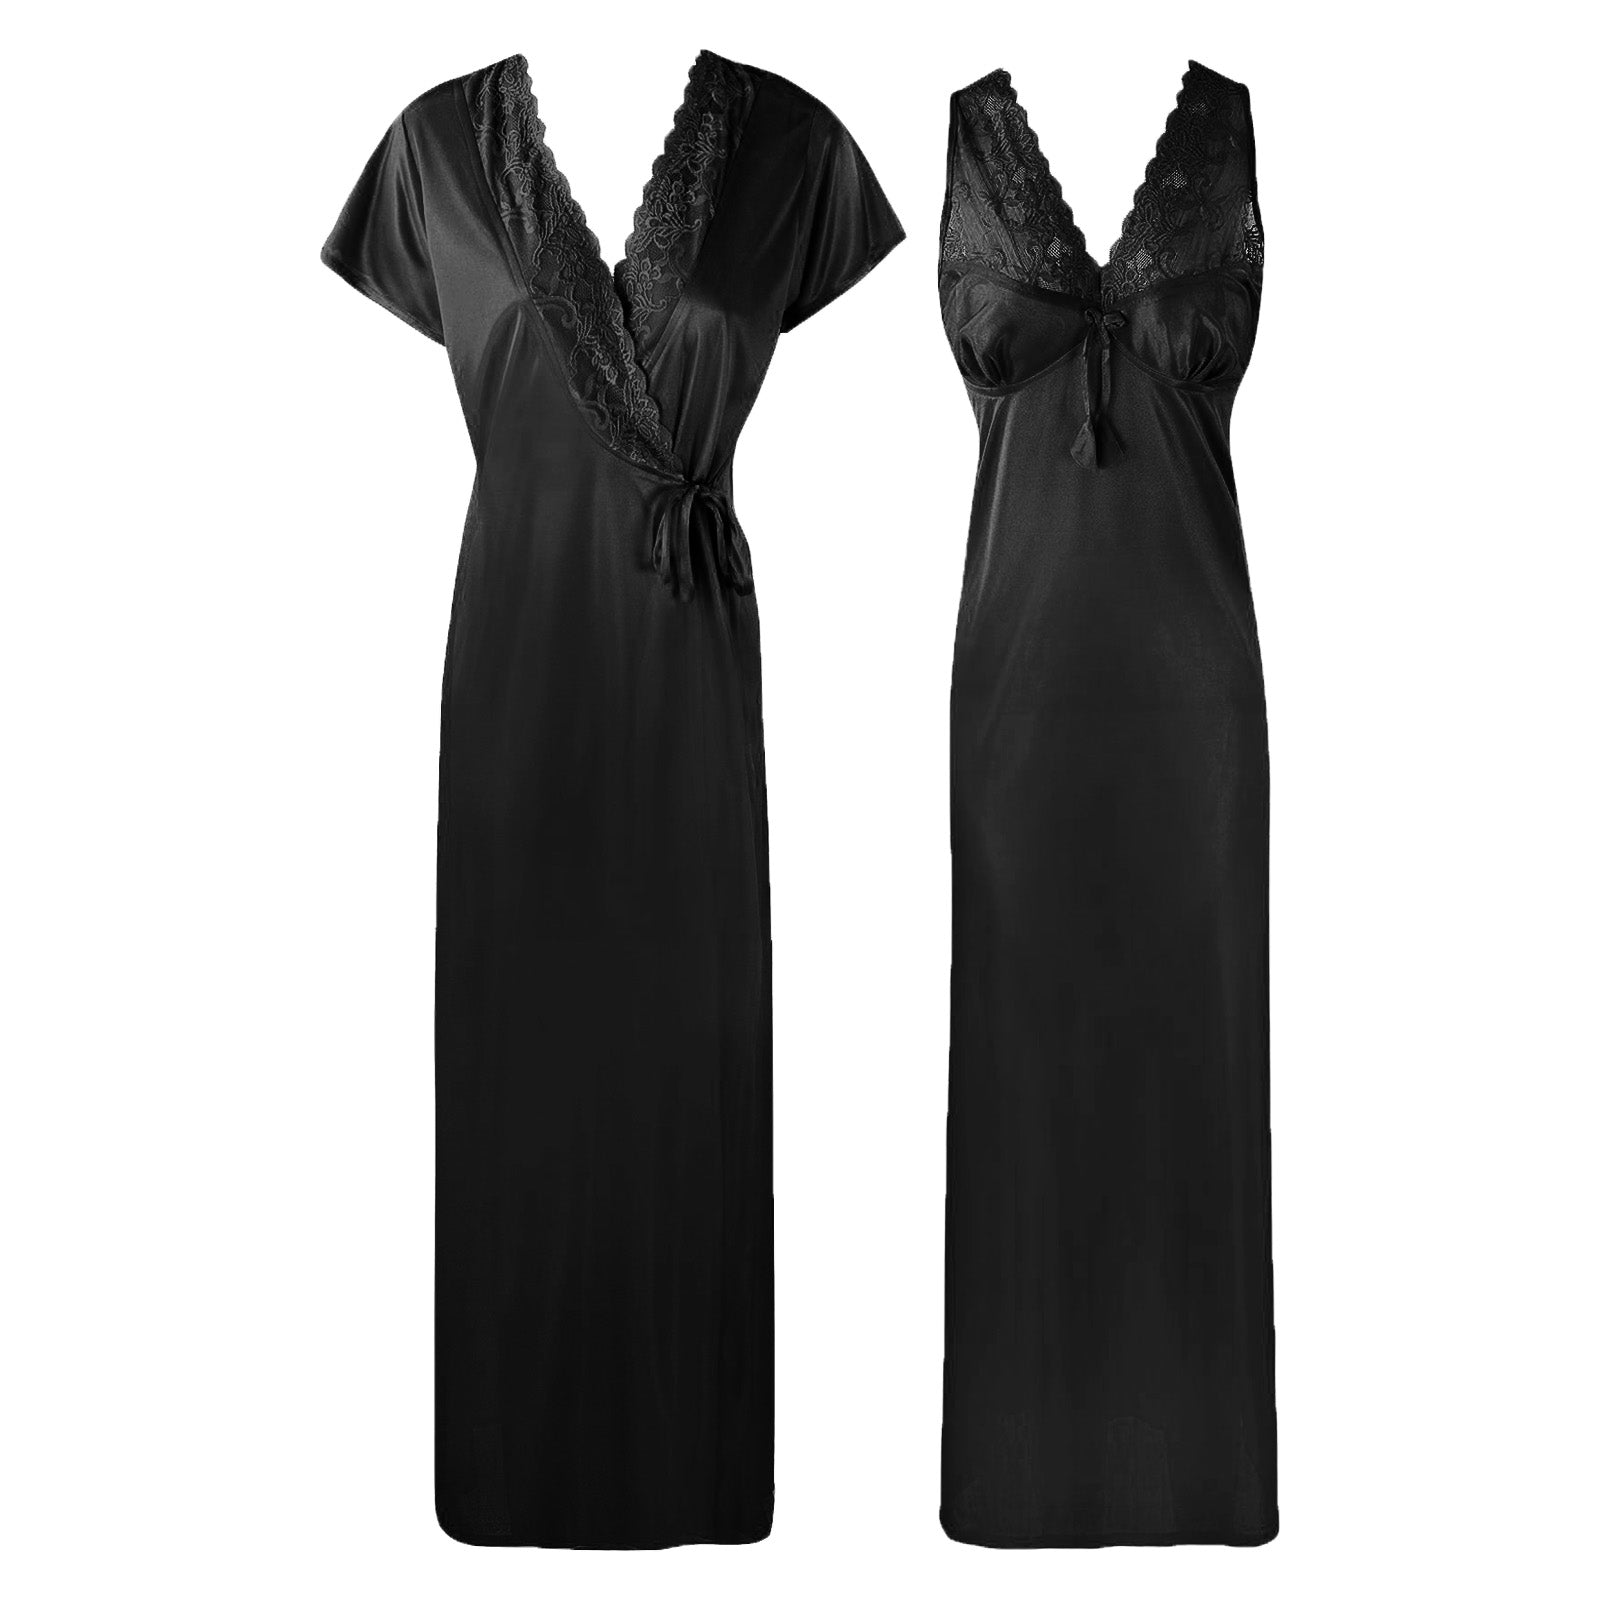 Black / One Size The Orange Tags Womens Satin Long Nightdress Lace Detailed The Orange Tags